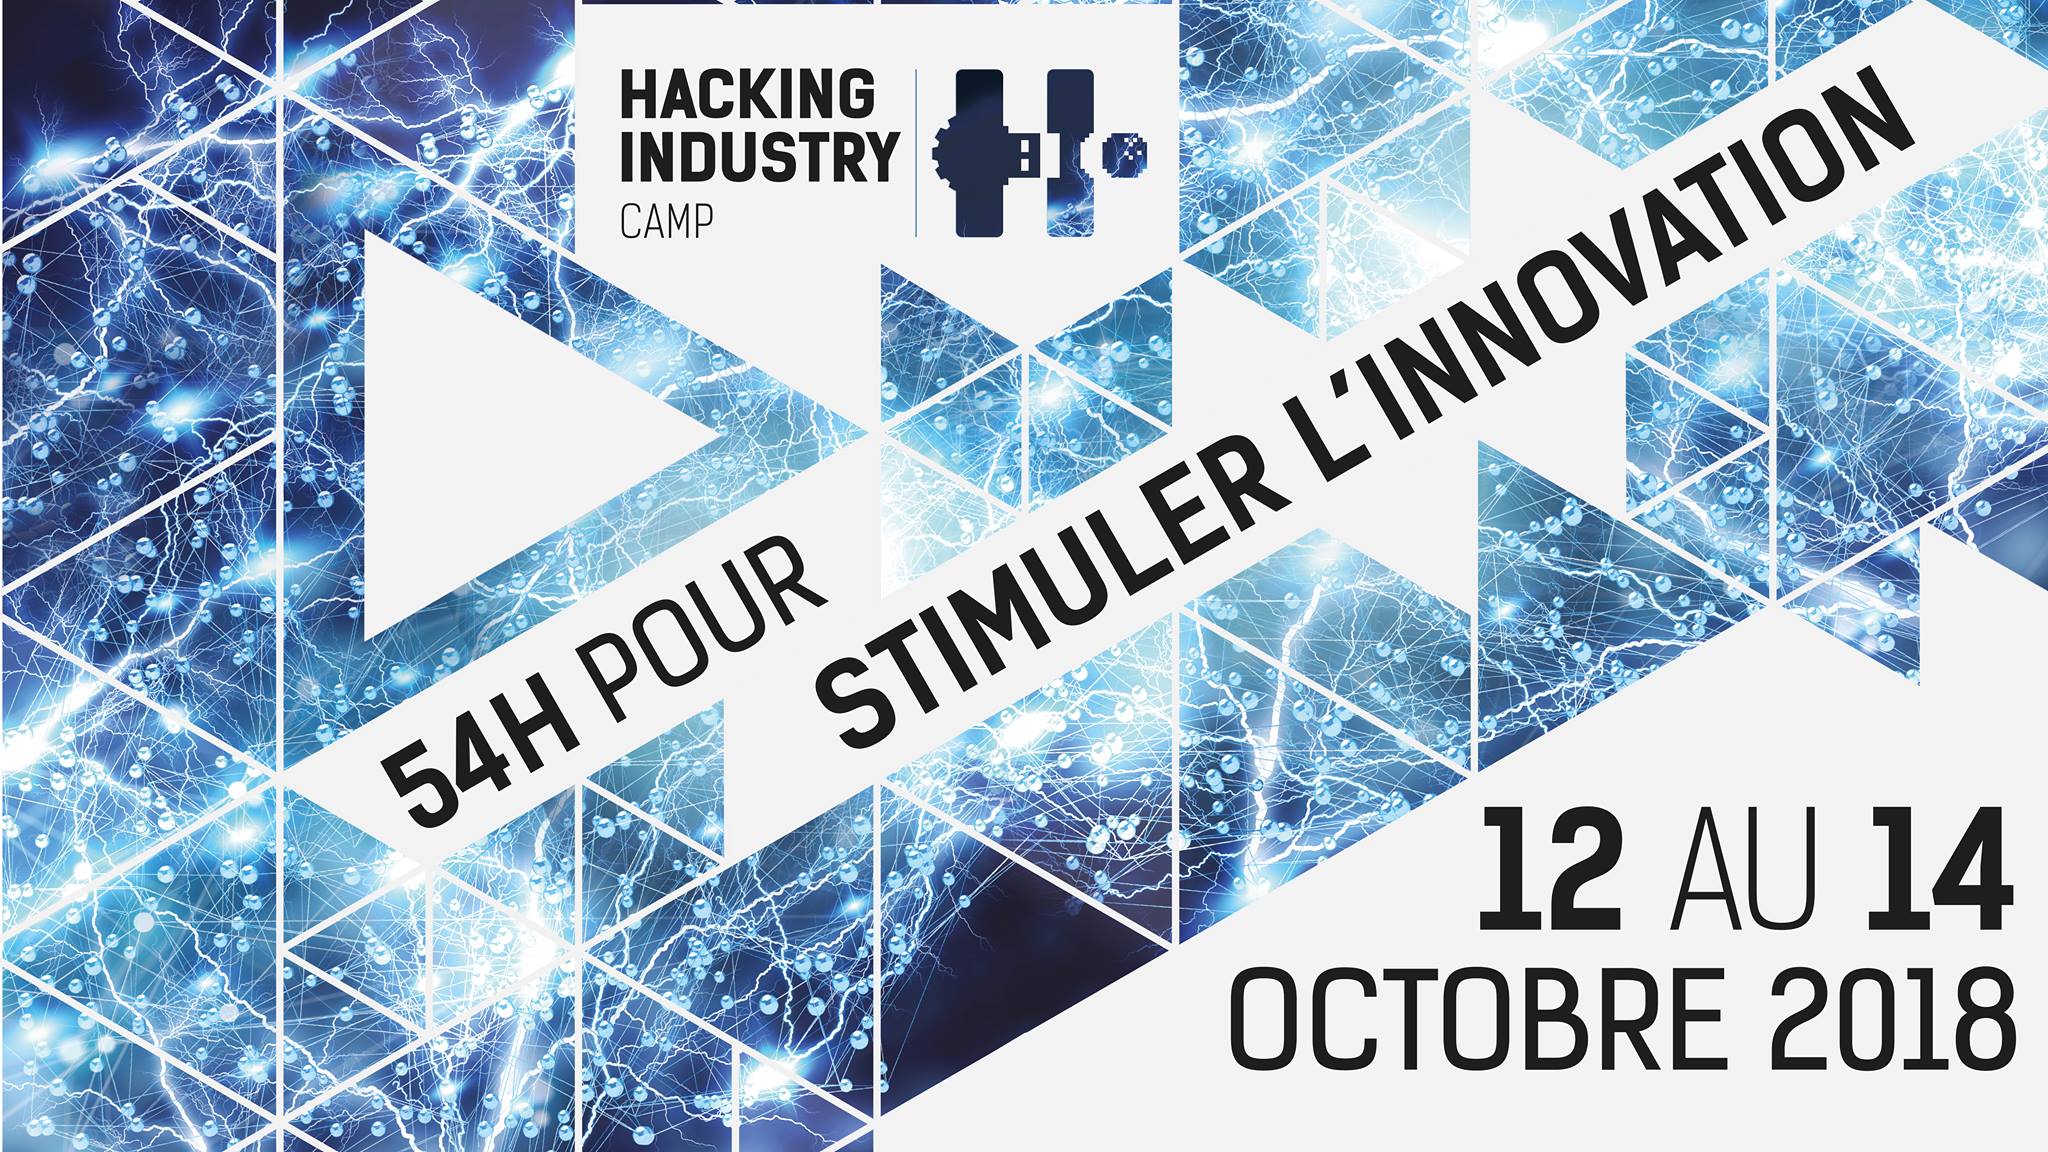 Hacking Industry Camp 2018